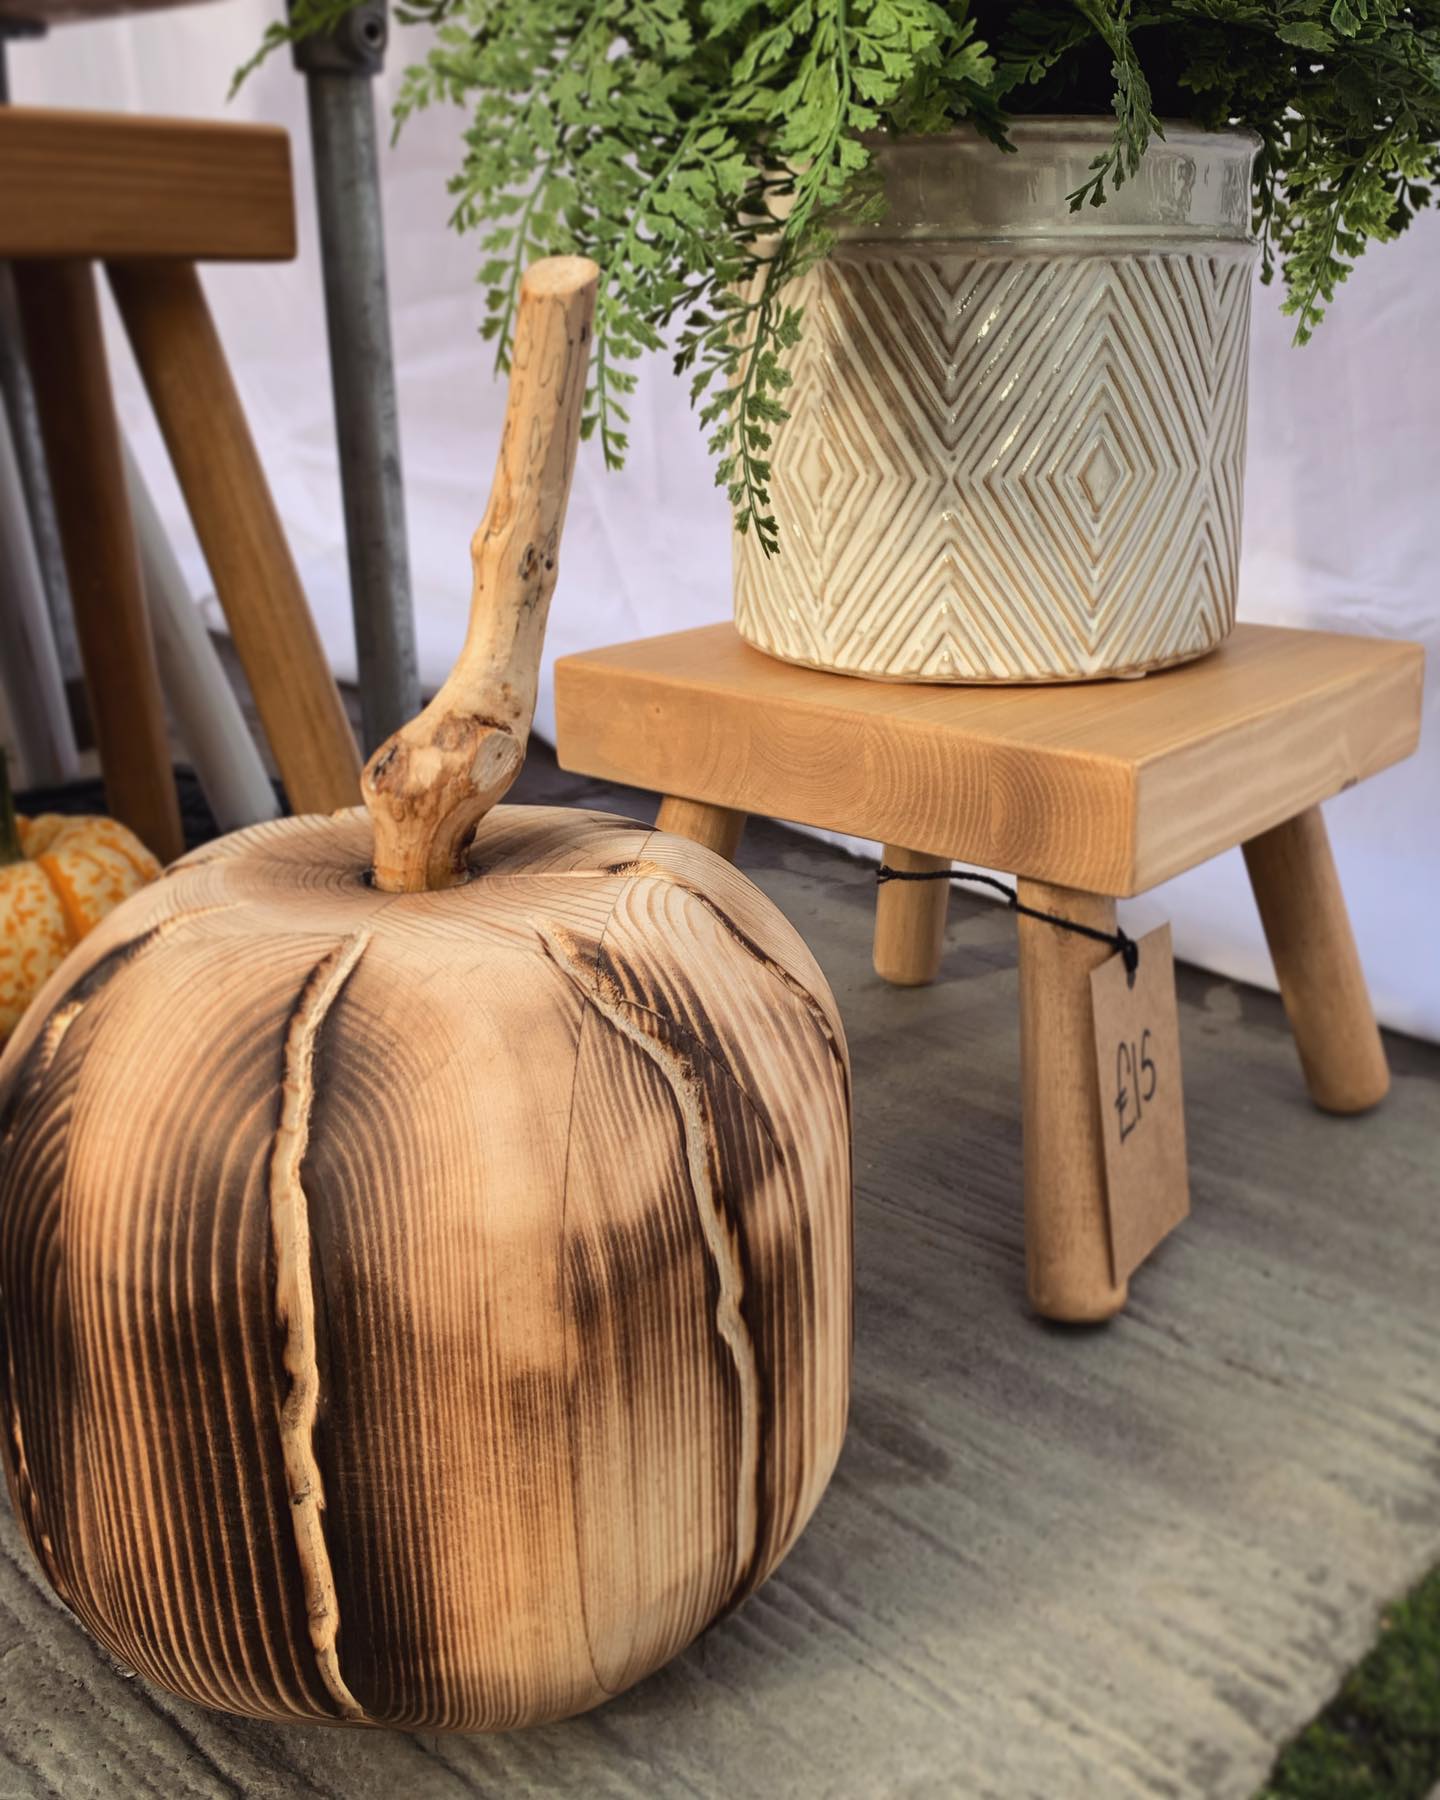 A handcrafted pumpkin by Tweed Looking fab on our stall today!